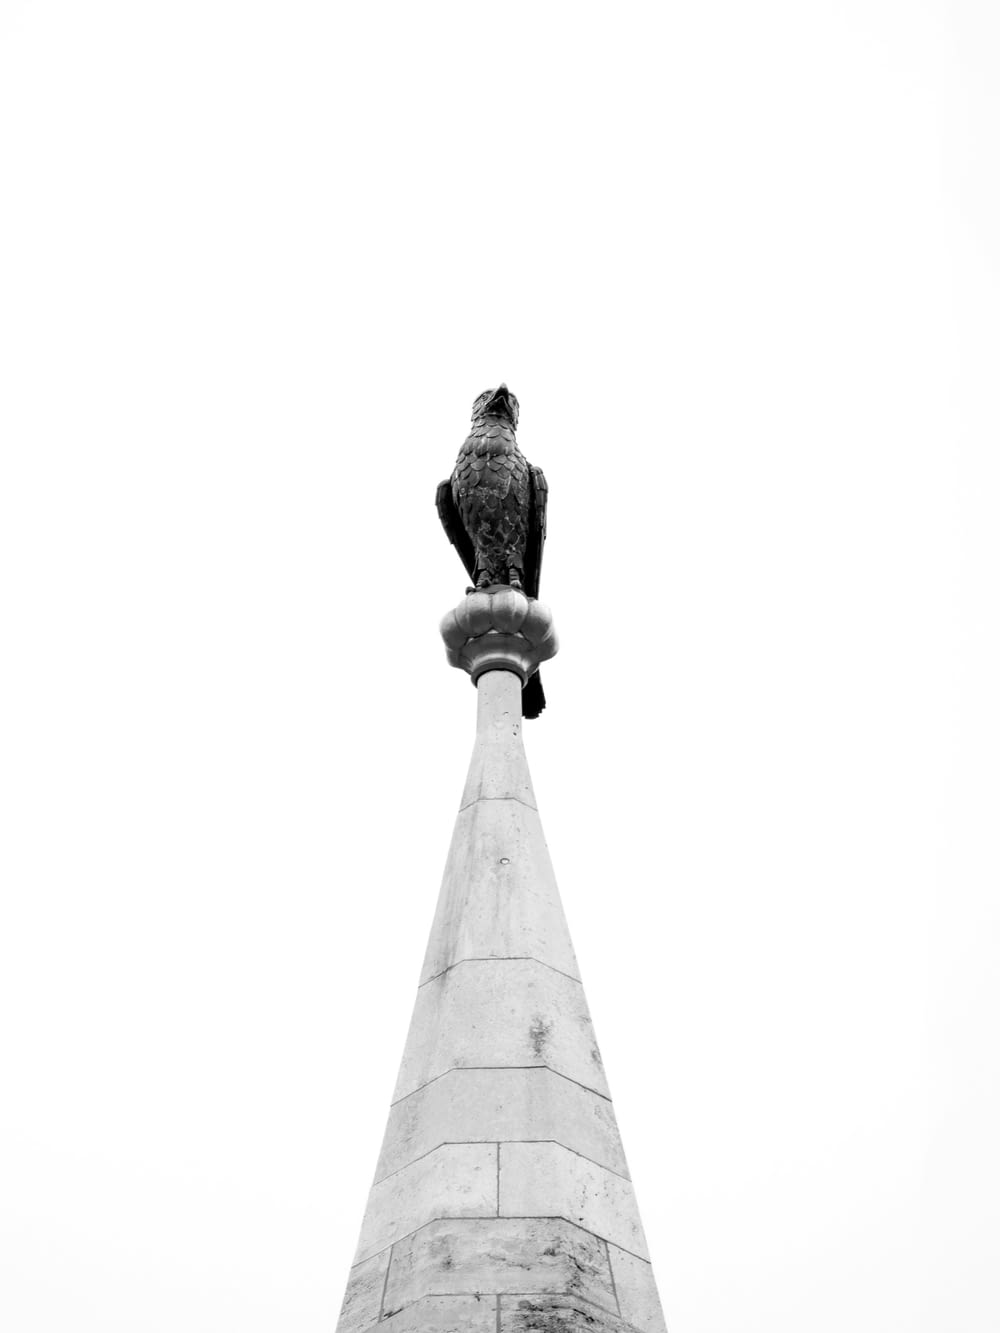 a black and white photo of a statue of a bird